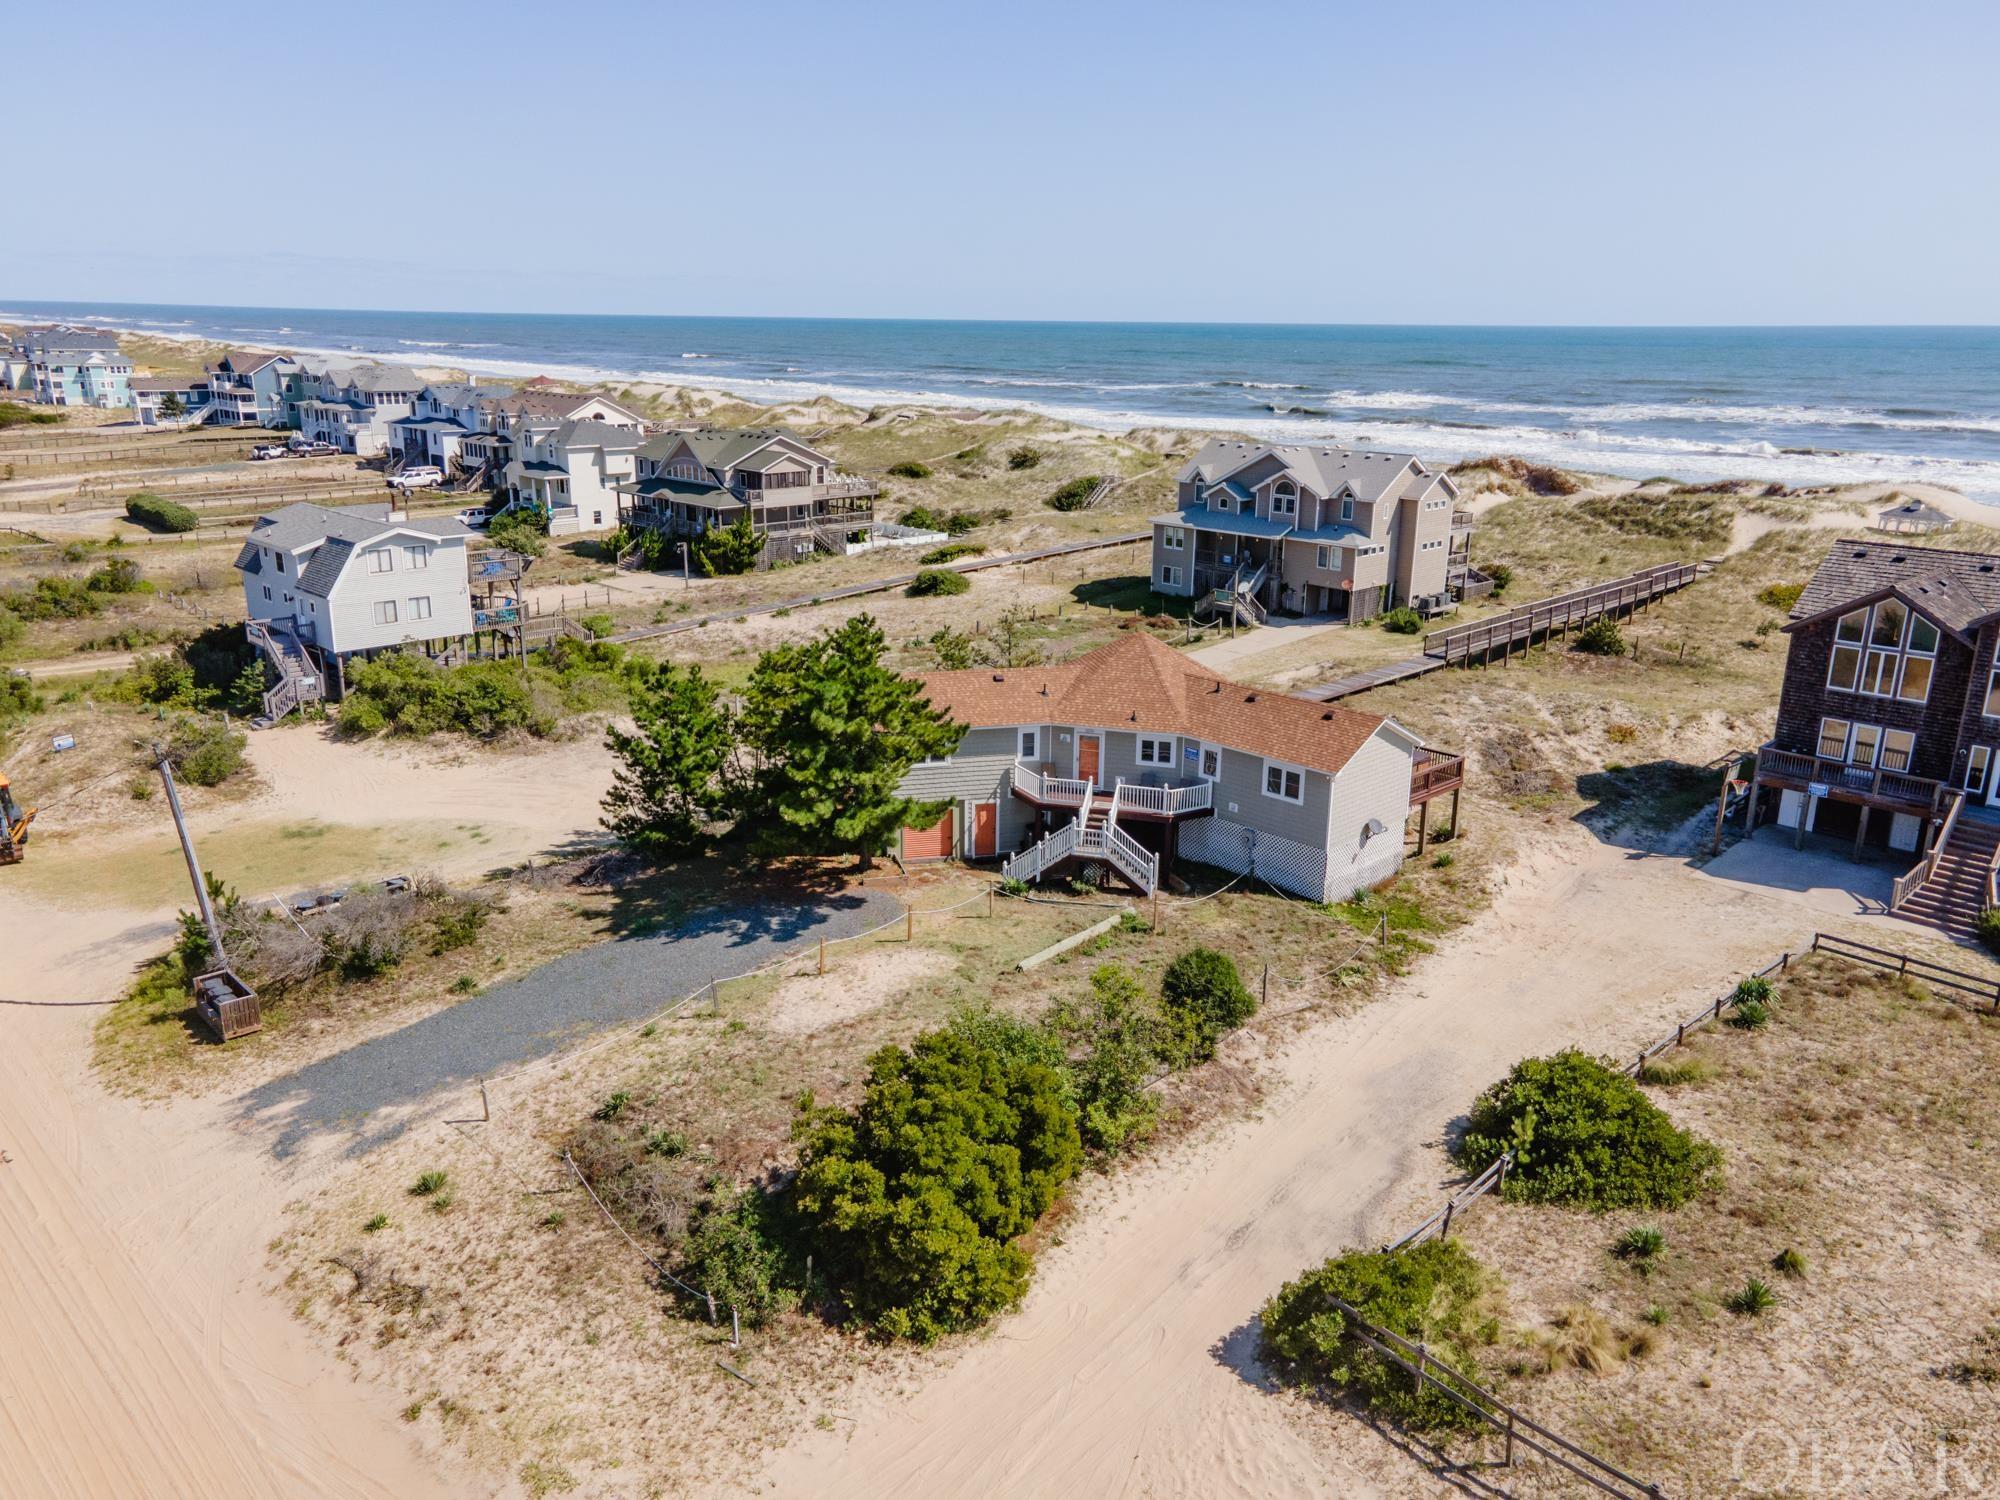 Beautiful oceanfront cottage located in the heart of Carova Beach.  This home is turn key and ready to go with huge upgrades including, but not limited to new siding(2017), fortified roof(2022), new septic drainfields(2022), all new plumbing(2023).  There are so many possibilities whether it be a 2nd home or investment property, with a rental projection of $91,285 for 2024!  This three bedroom home is located in an X-Flood Zone, which means no flood insurance is required.  As you walk in, you are greeted with a cozy open floor plan great room and kitchen area with cathedral ceilings and tongue and groove walls that give you that classic Outer Banks beach cottage feel.  The south bedroom is ensuite and has its own slider leading out to the oceanside deck and hot tub area.  The north wing of the house has the two remaining bedrooms currently set up as a king room and a bunk room.  There is an attached garage that is great for owner storage or has the potential to be turned into a small rec room.  Underneath the house has a concrete slab and makes for a perfect shaded gathering spot during the summer.  Everything flows smoothly to the elevated beach walk to the dune which gives easy access to the beach.  Schedule your showing today and don't miss your chance to own an affordable yet quality oceanfront beach house.